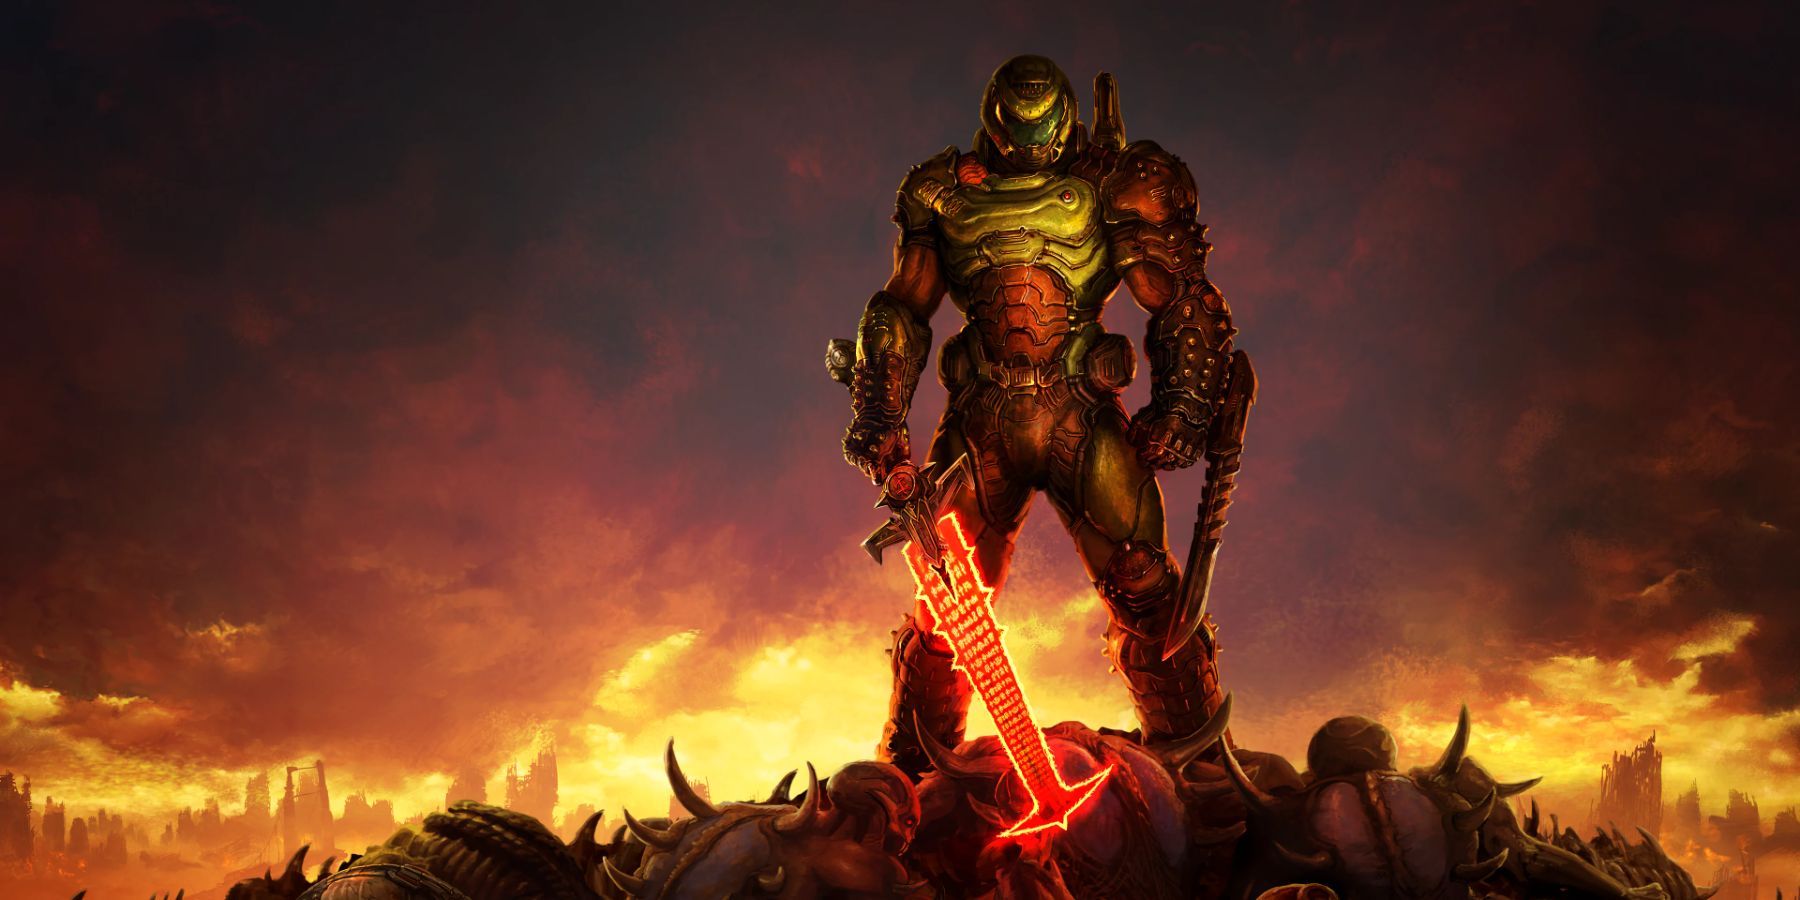 Mortal Kombat 1 Getting Doomslayer as a DLC Character Would be a Double-Edged Sword